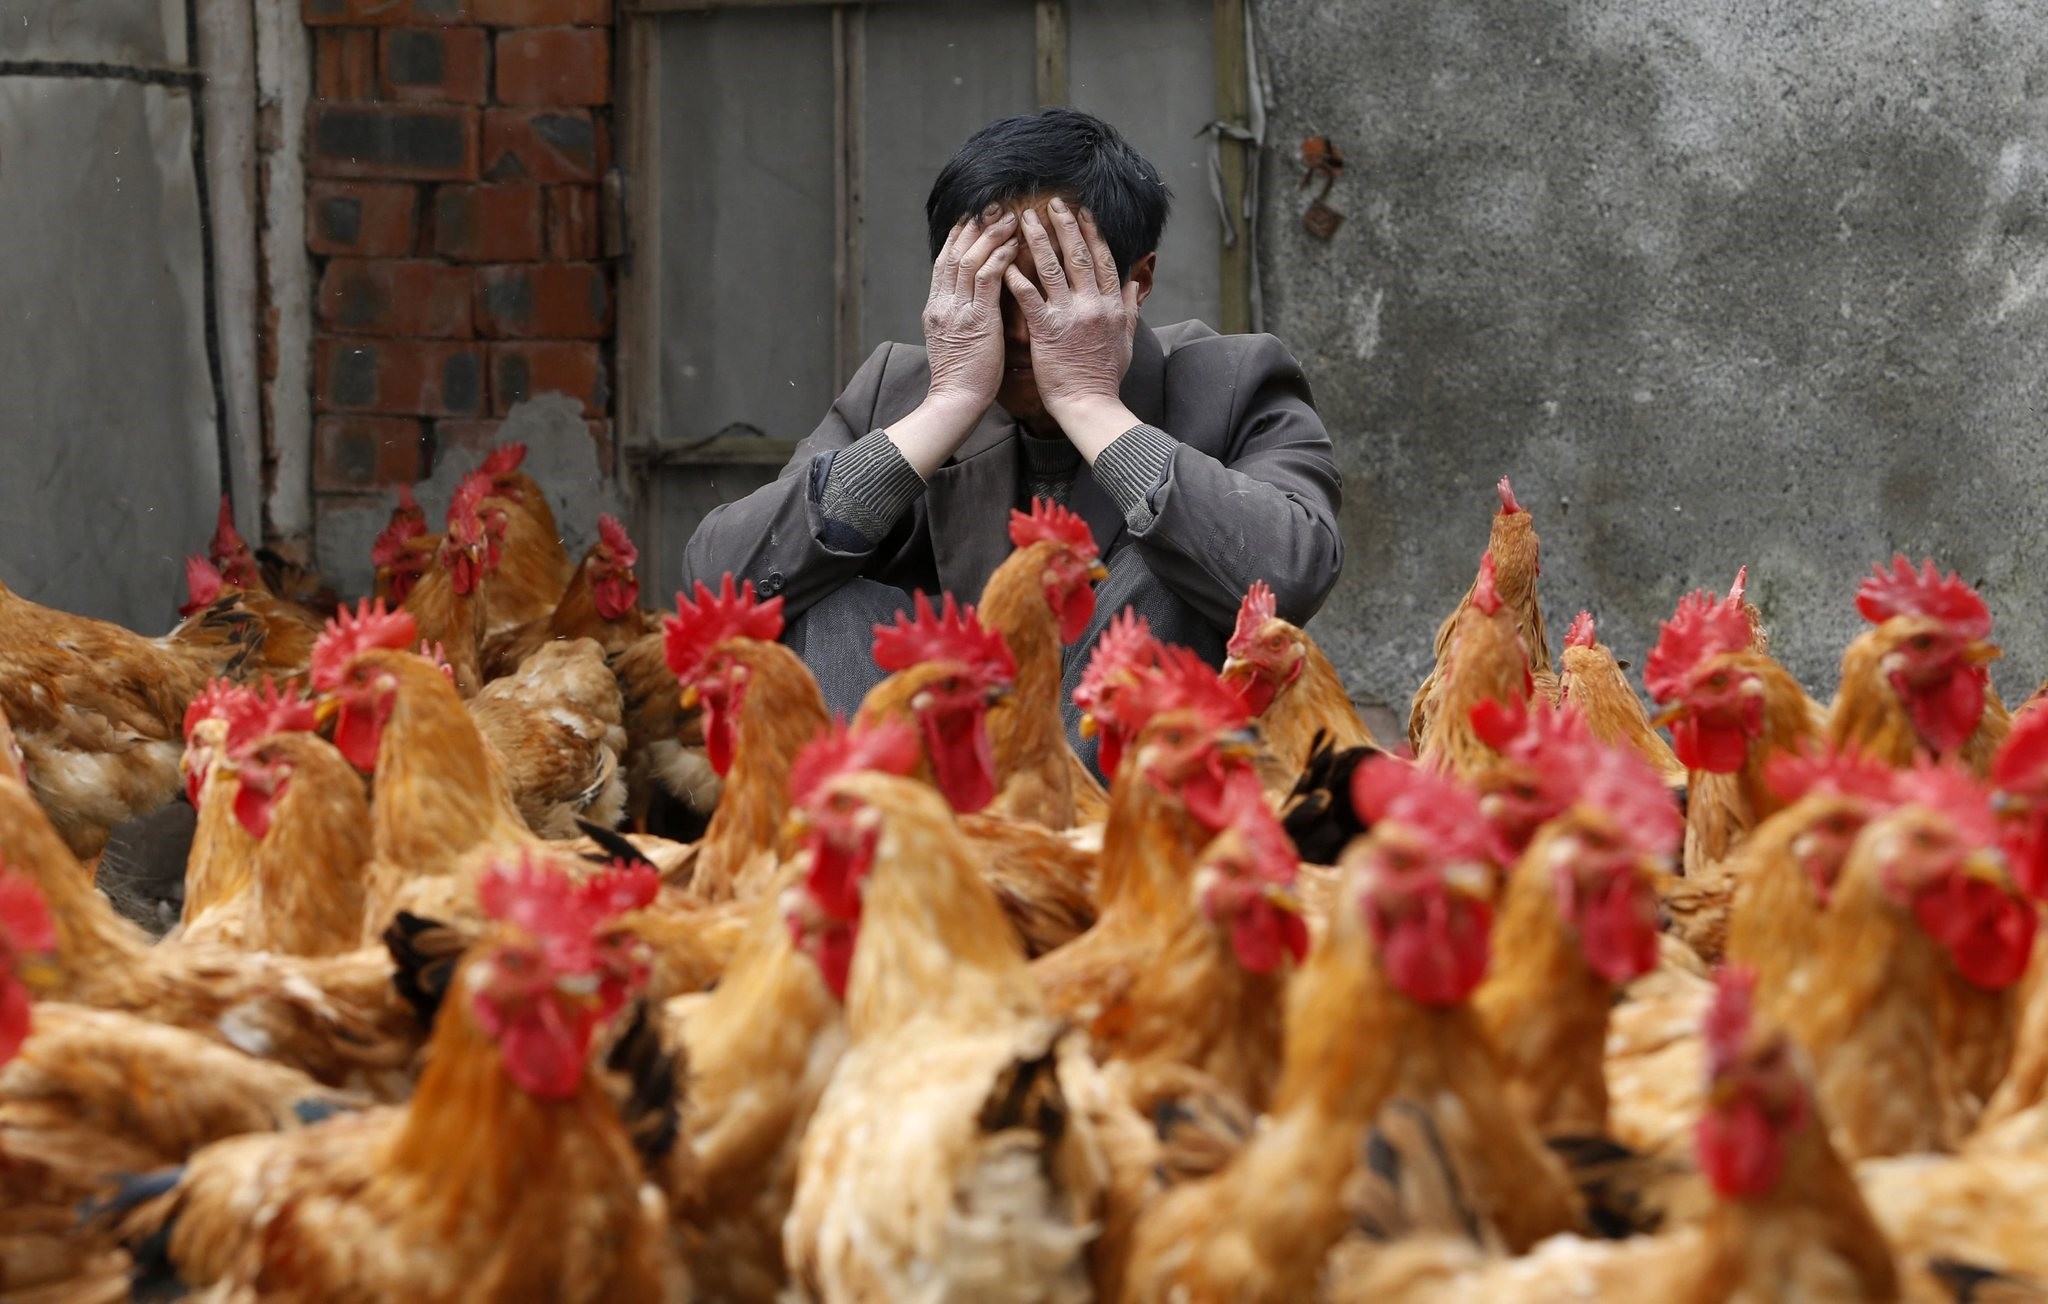 A breeder covers his face as he sits behind his chickens, which according to the breeder are not infected with the H7N9 virus, in Yuxin township, Zhejiang, on April 11, 2013. (REUTERS Photo)